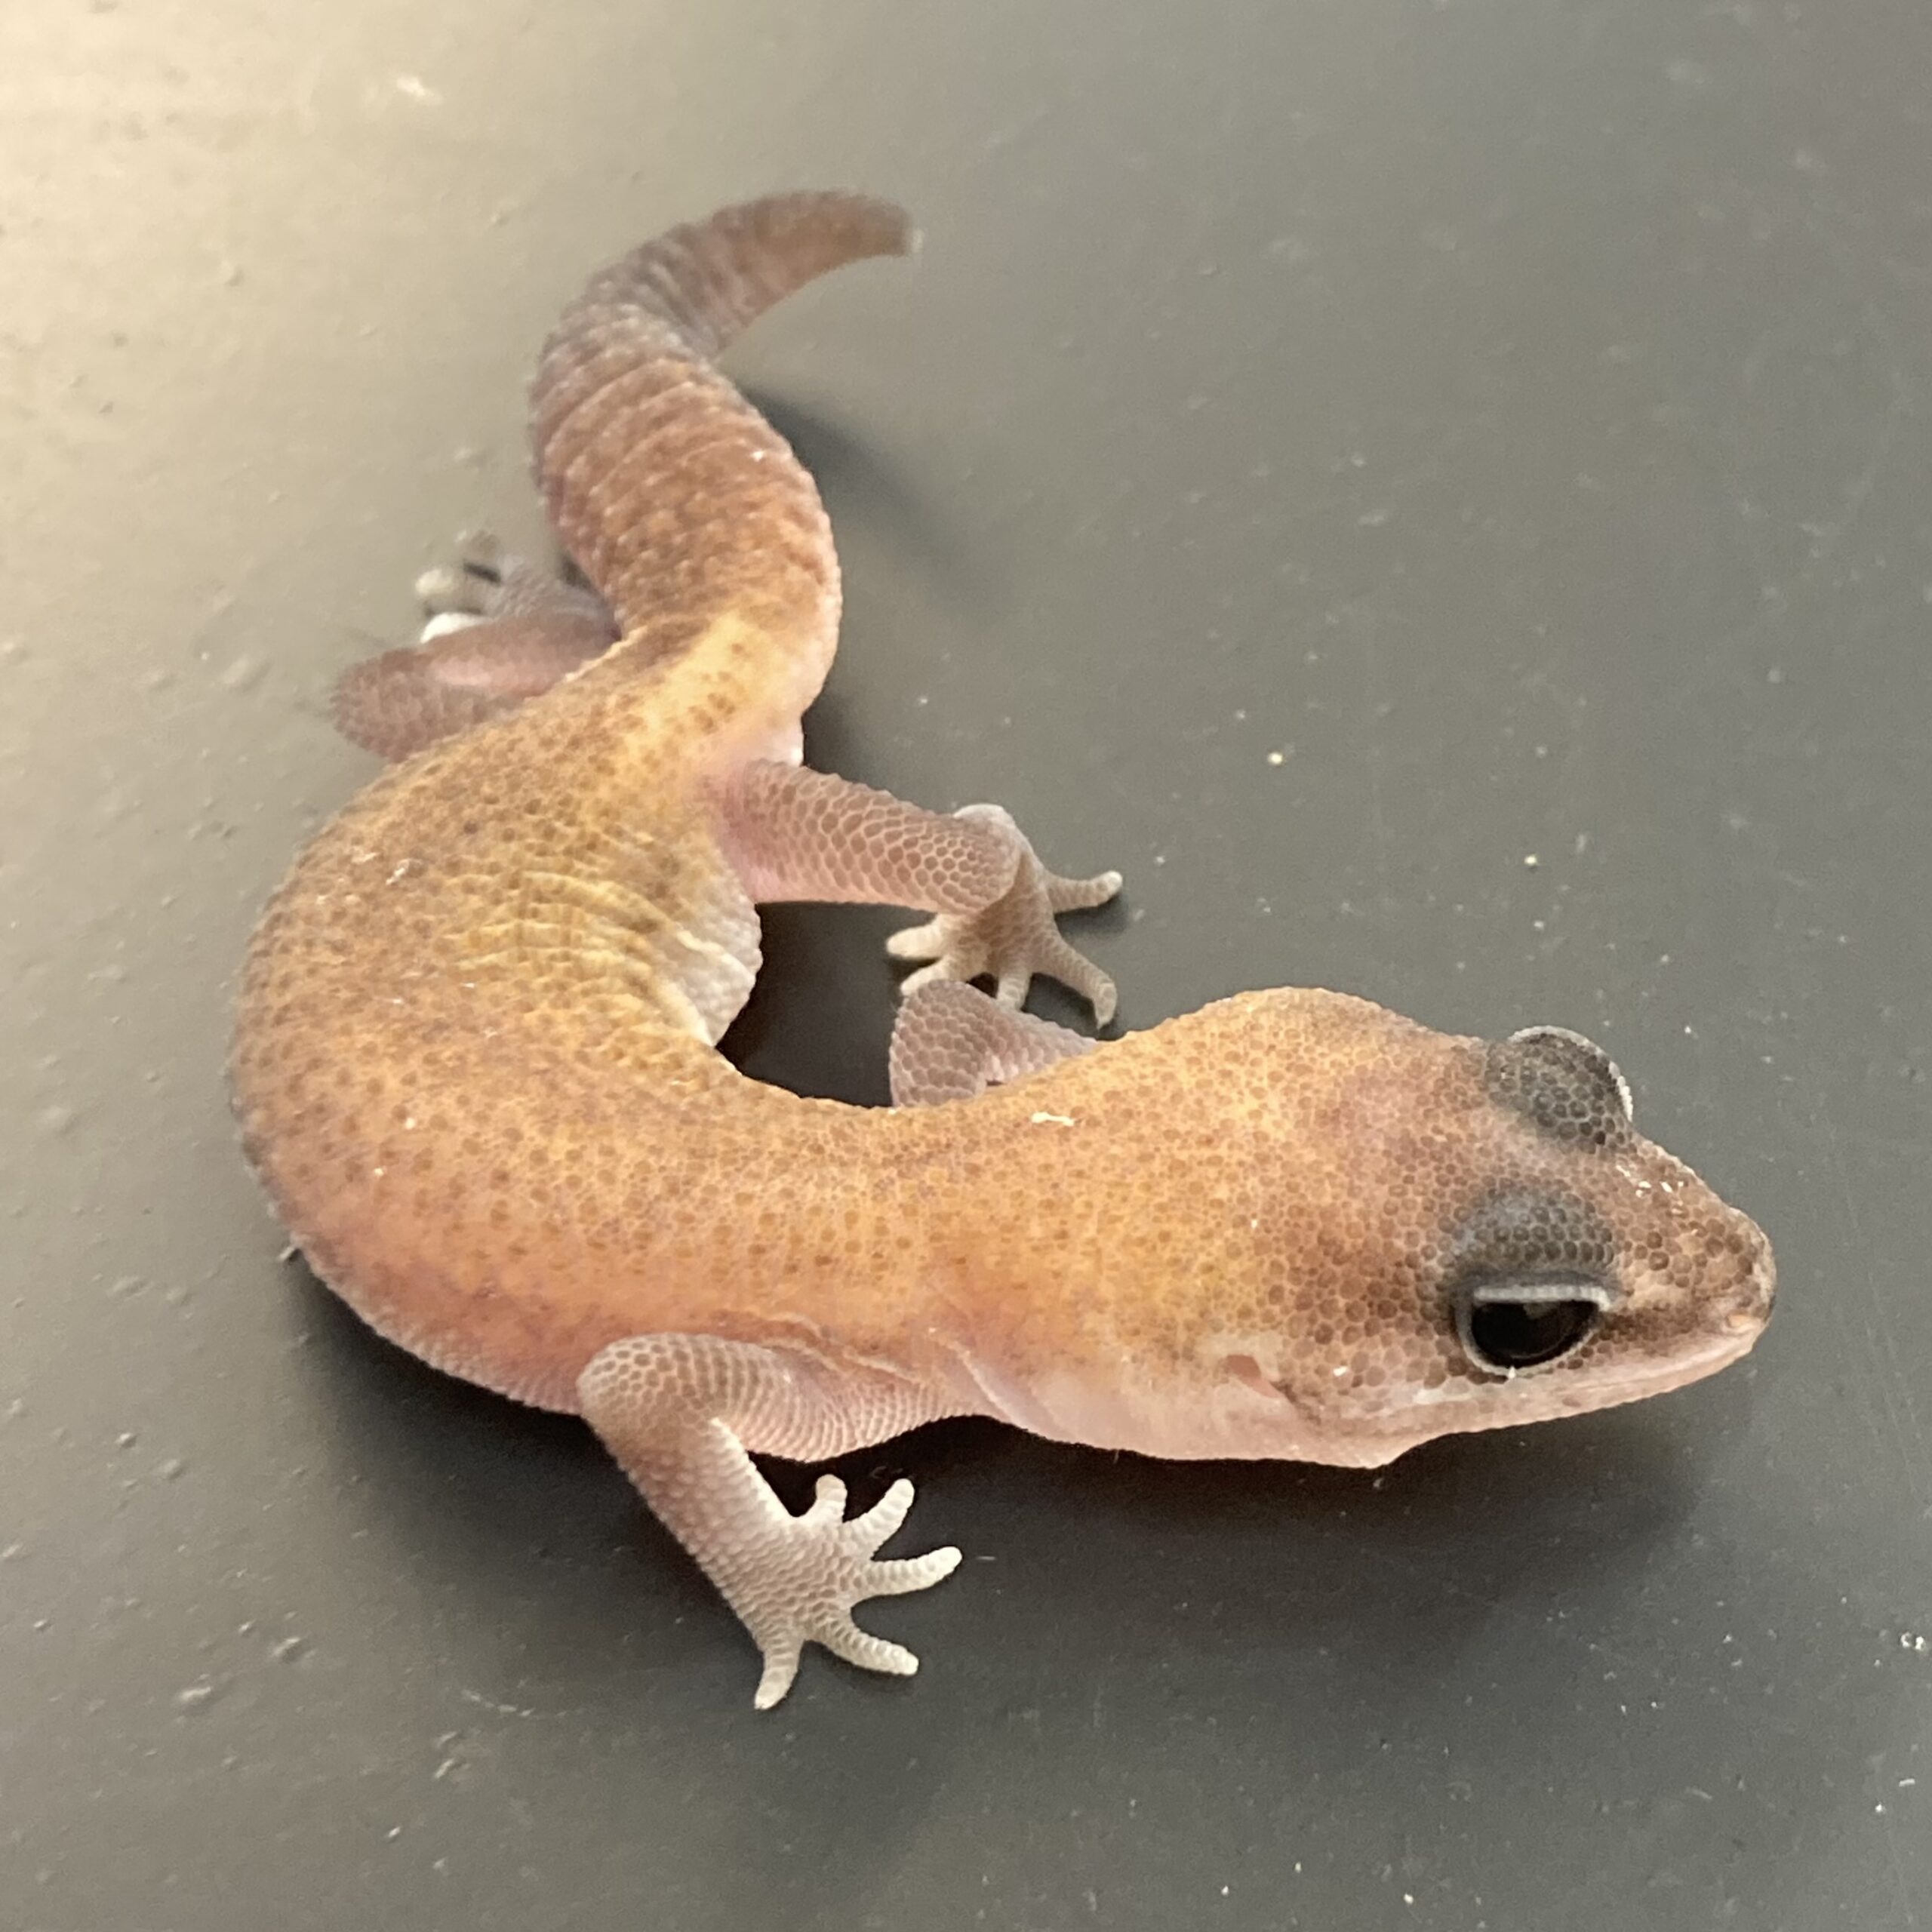 CB PATTERNLESS Fat Tailed Gecko